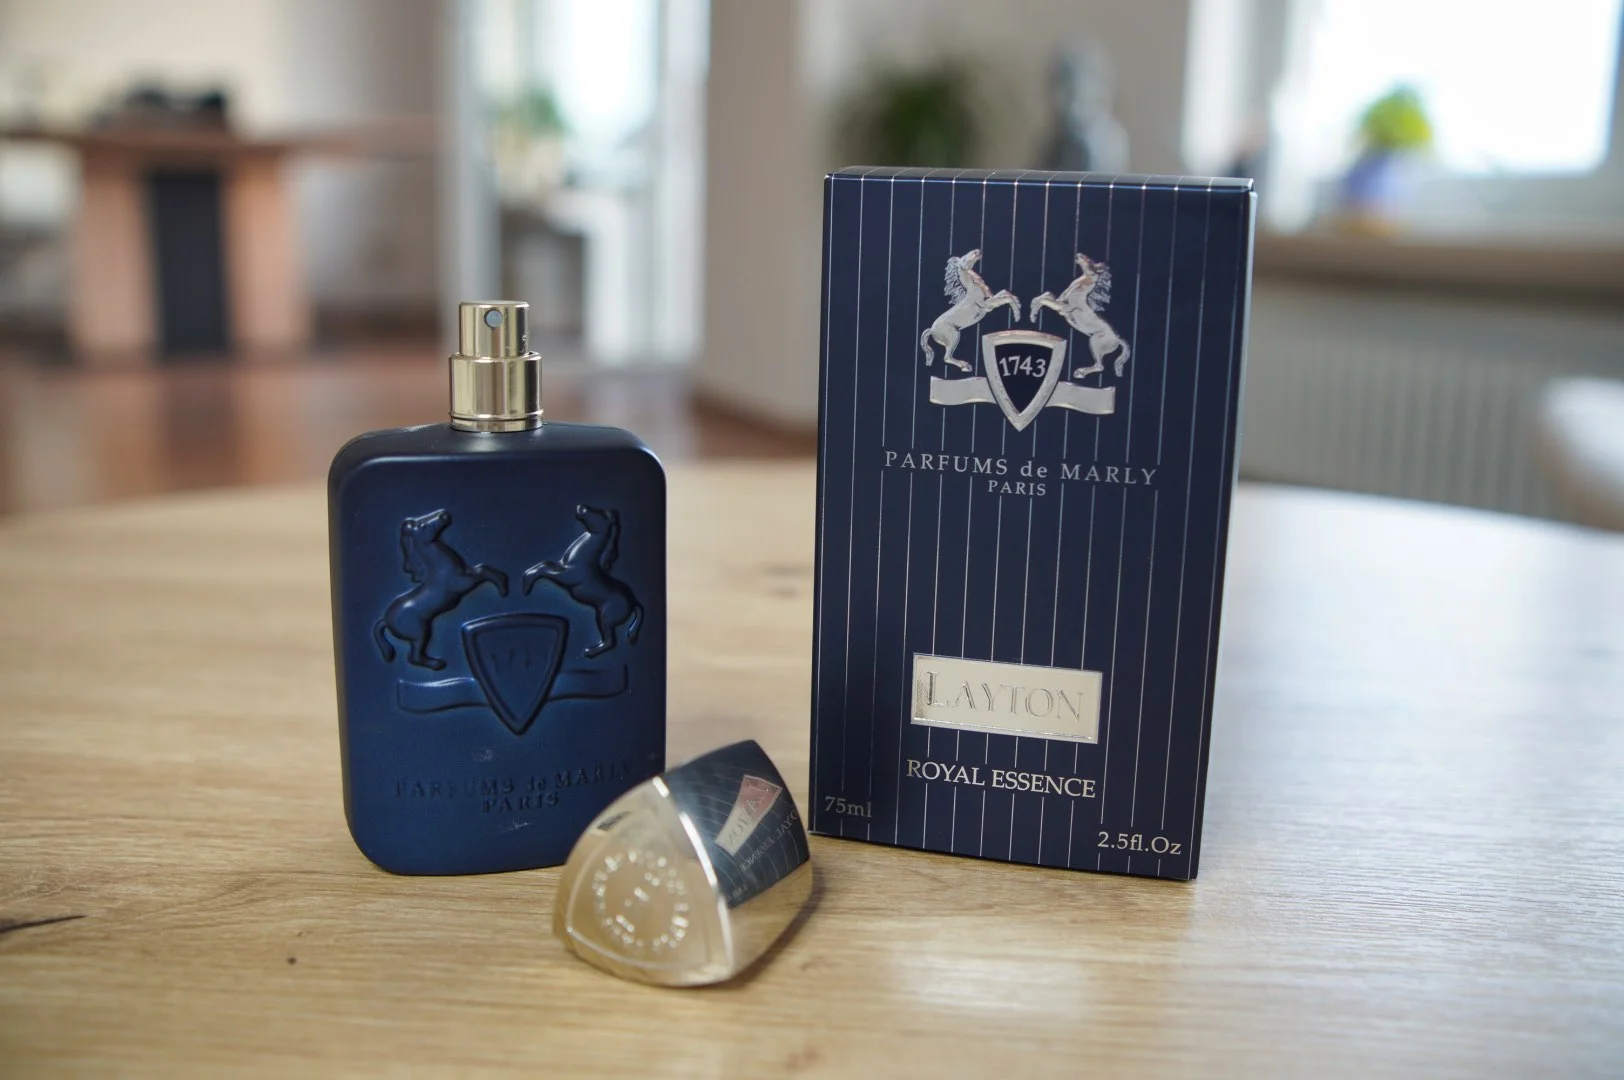 my opinion on Layton by Parfums de Marly